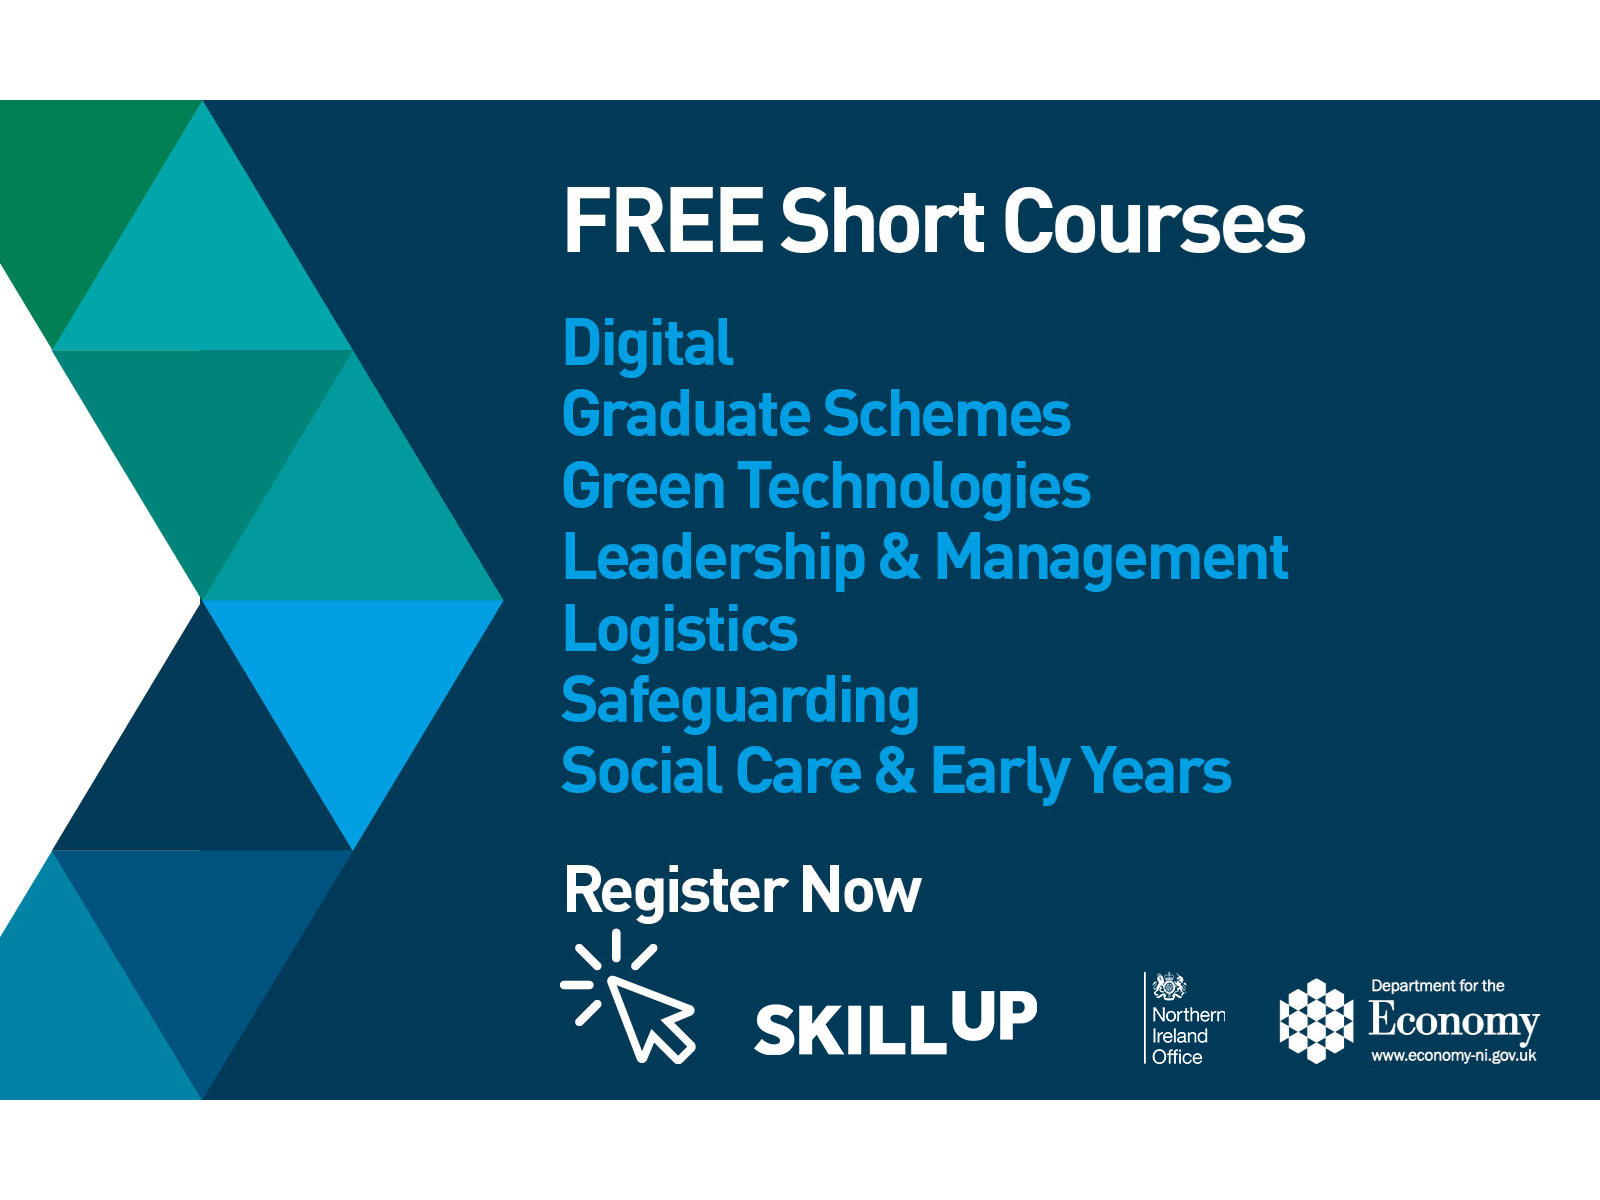 Free short courses